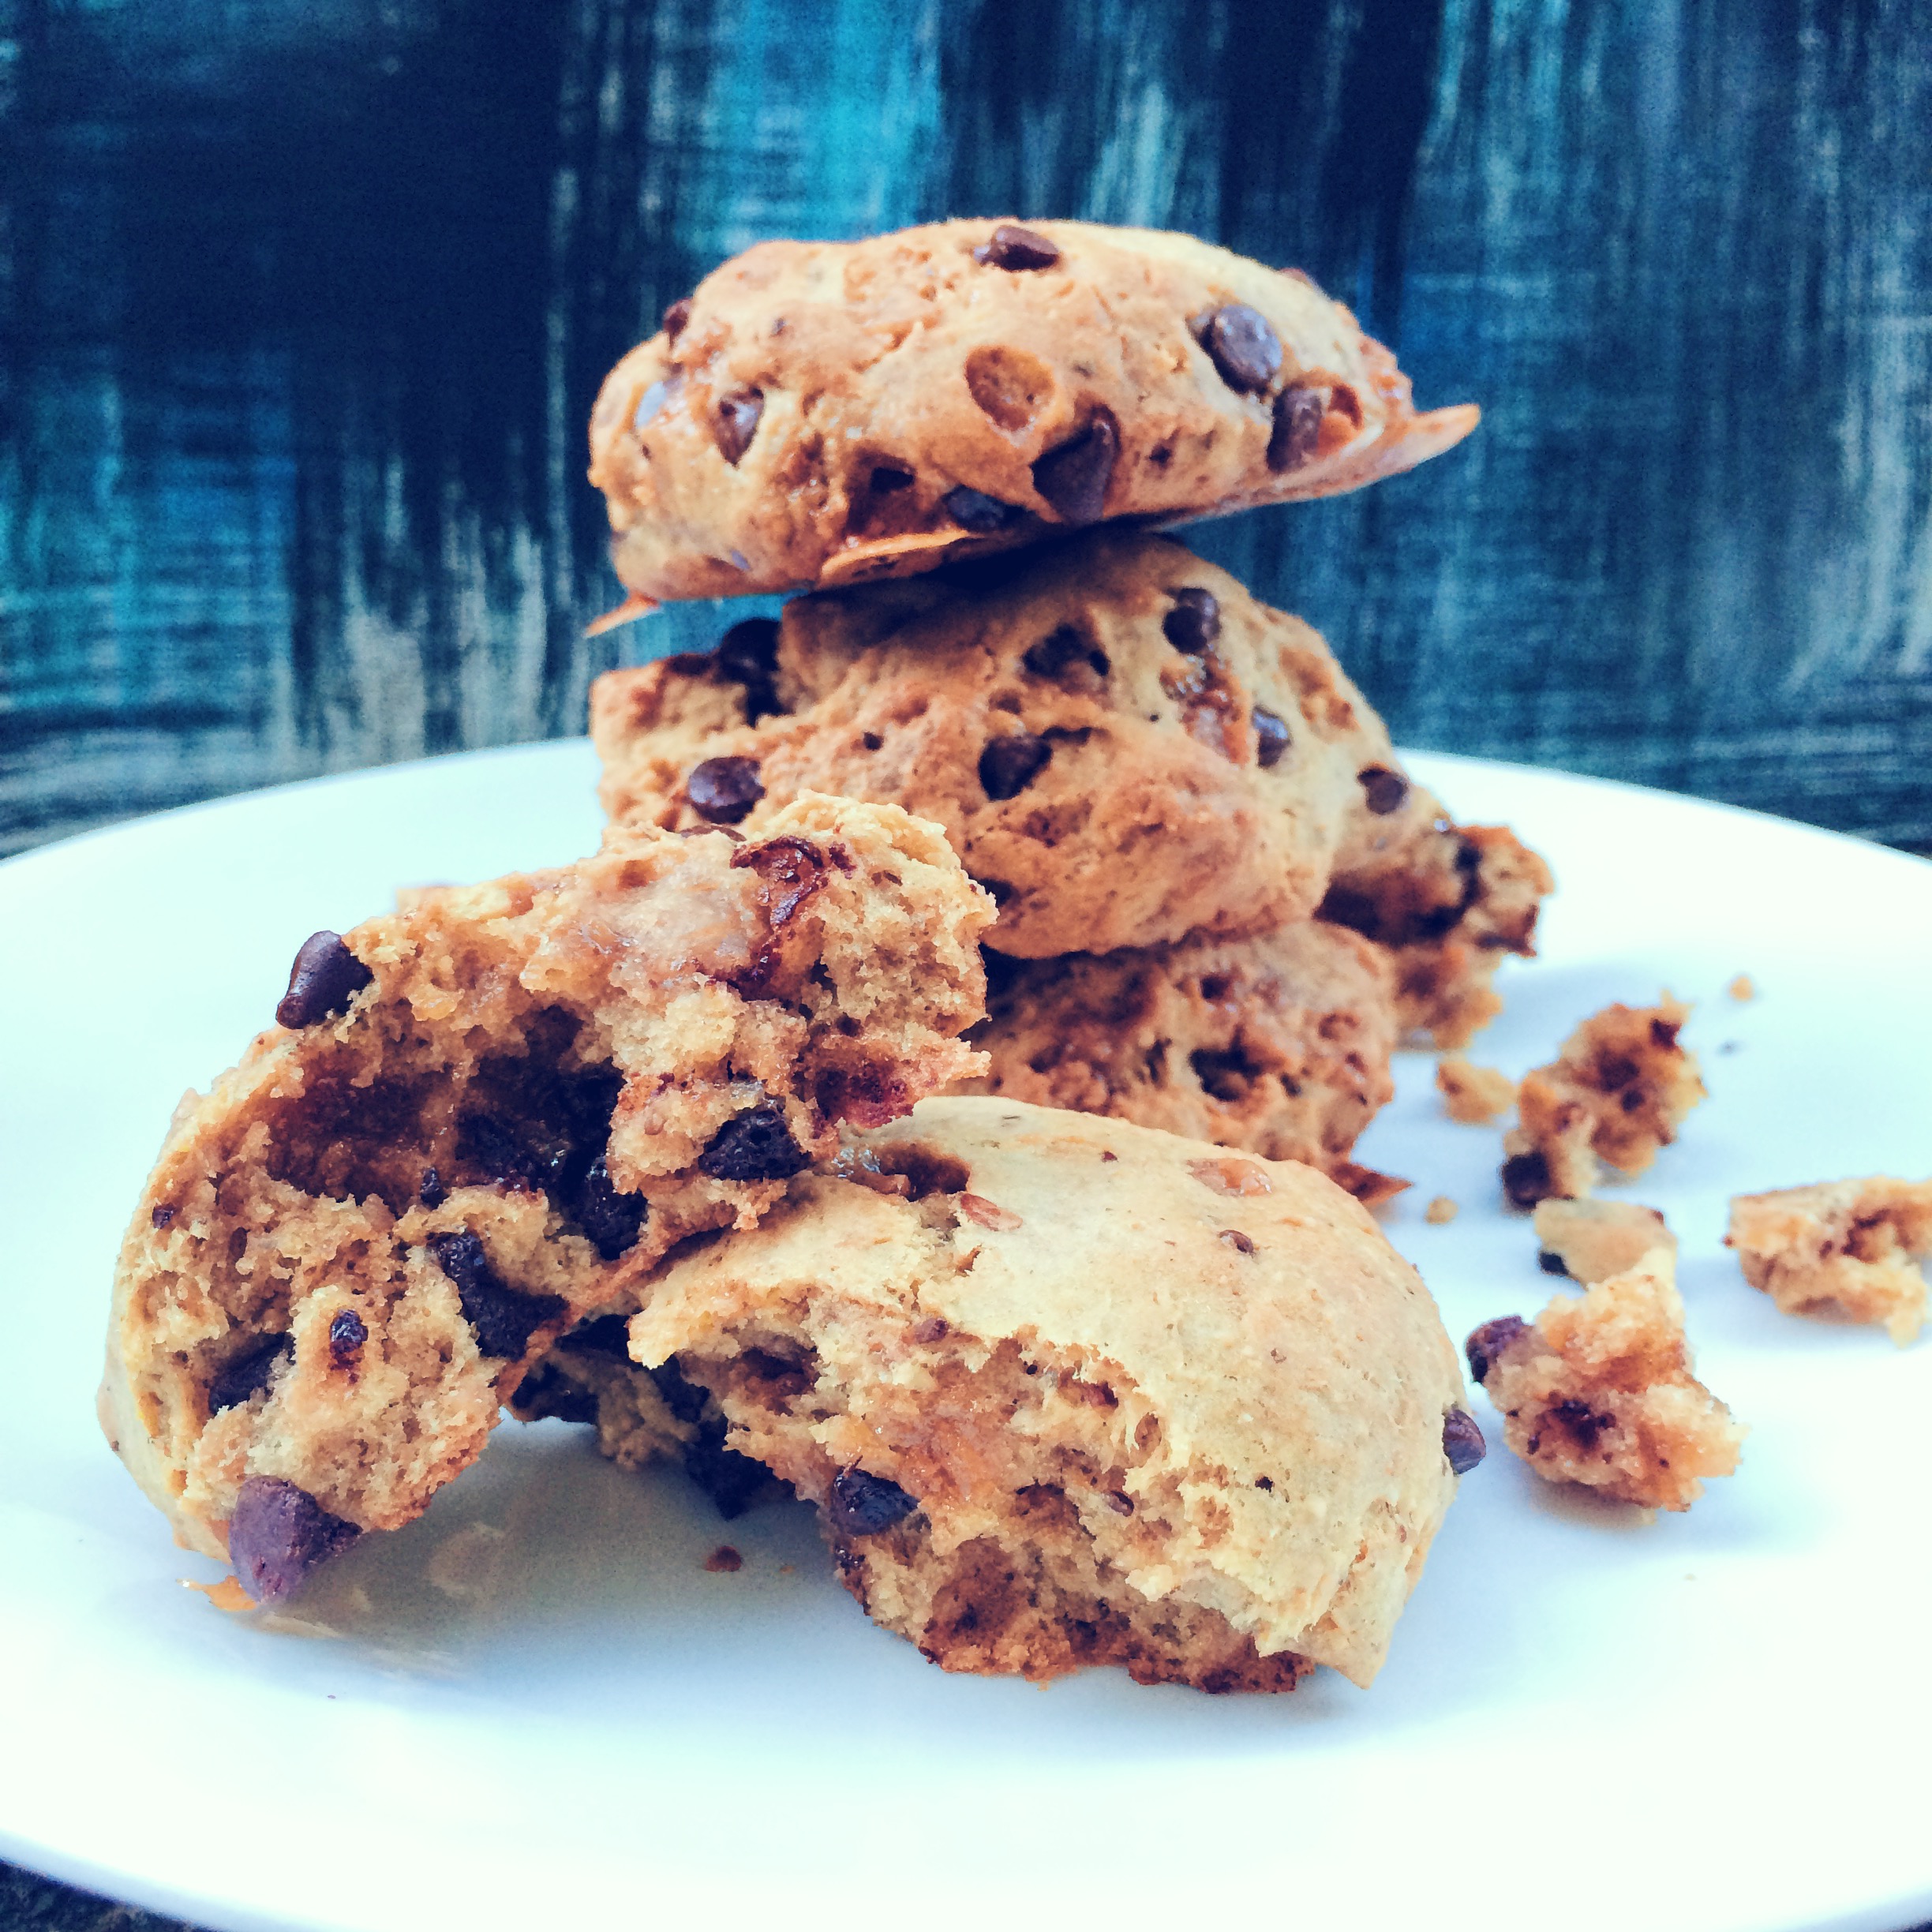 Review of the Thug Kitchen Almond Butter Chocolate Cookies